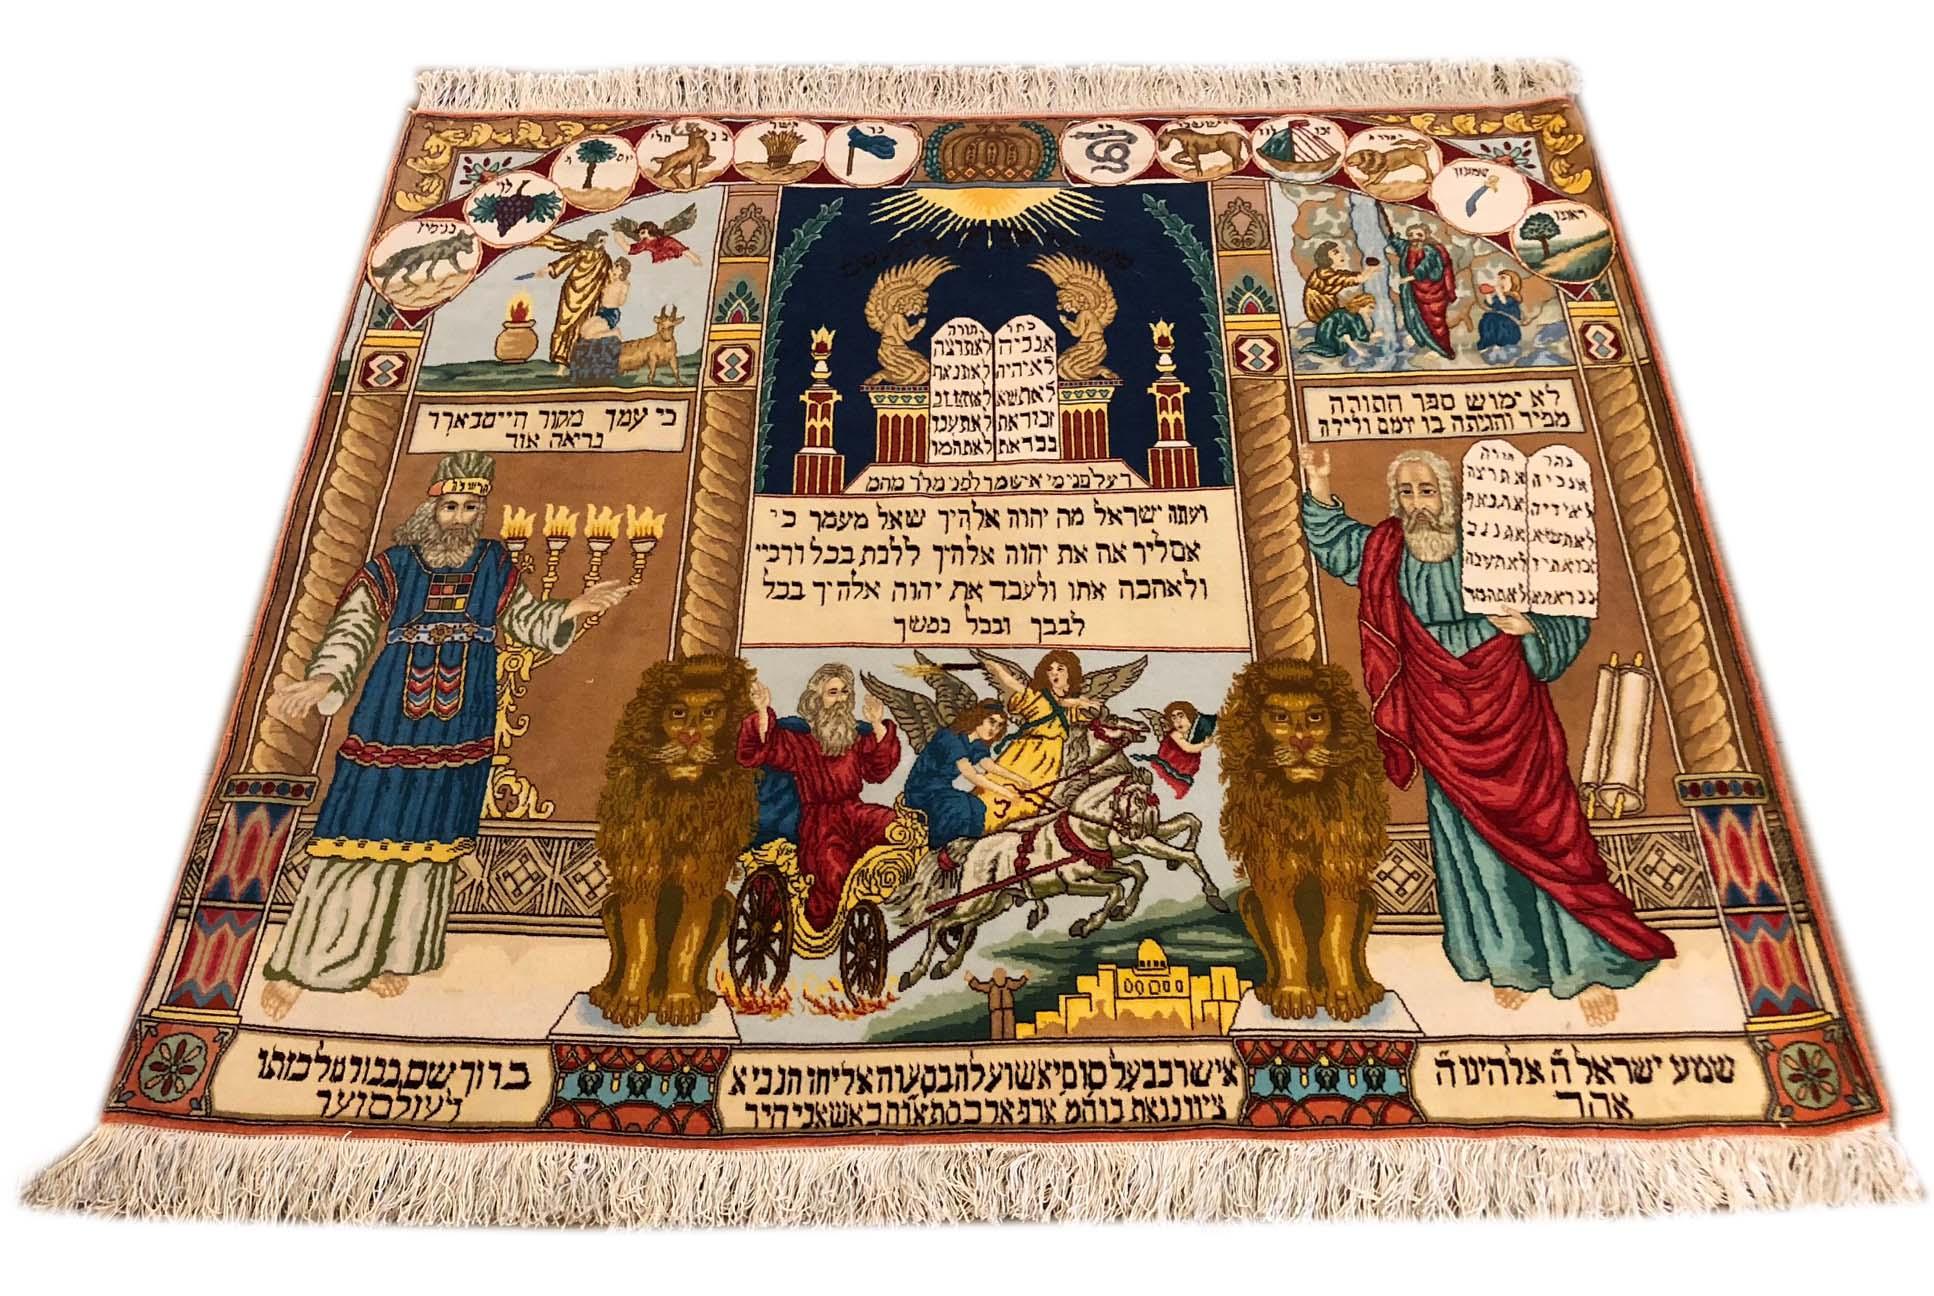 This beautiful authentic rug has been woven in Tabriz, Iran. This rug features a history of Jewish scenery. The story is about Moses and his Ten Commandants with a level of high of quality. The pile is wool and silk with cotton foundation. The size